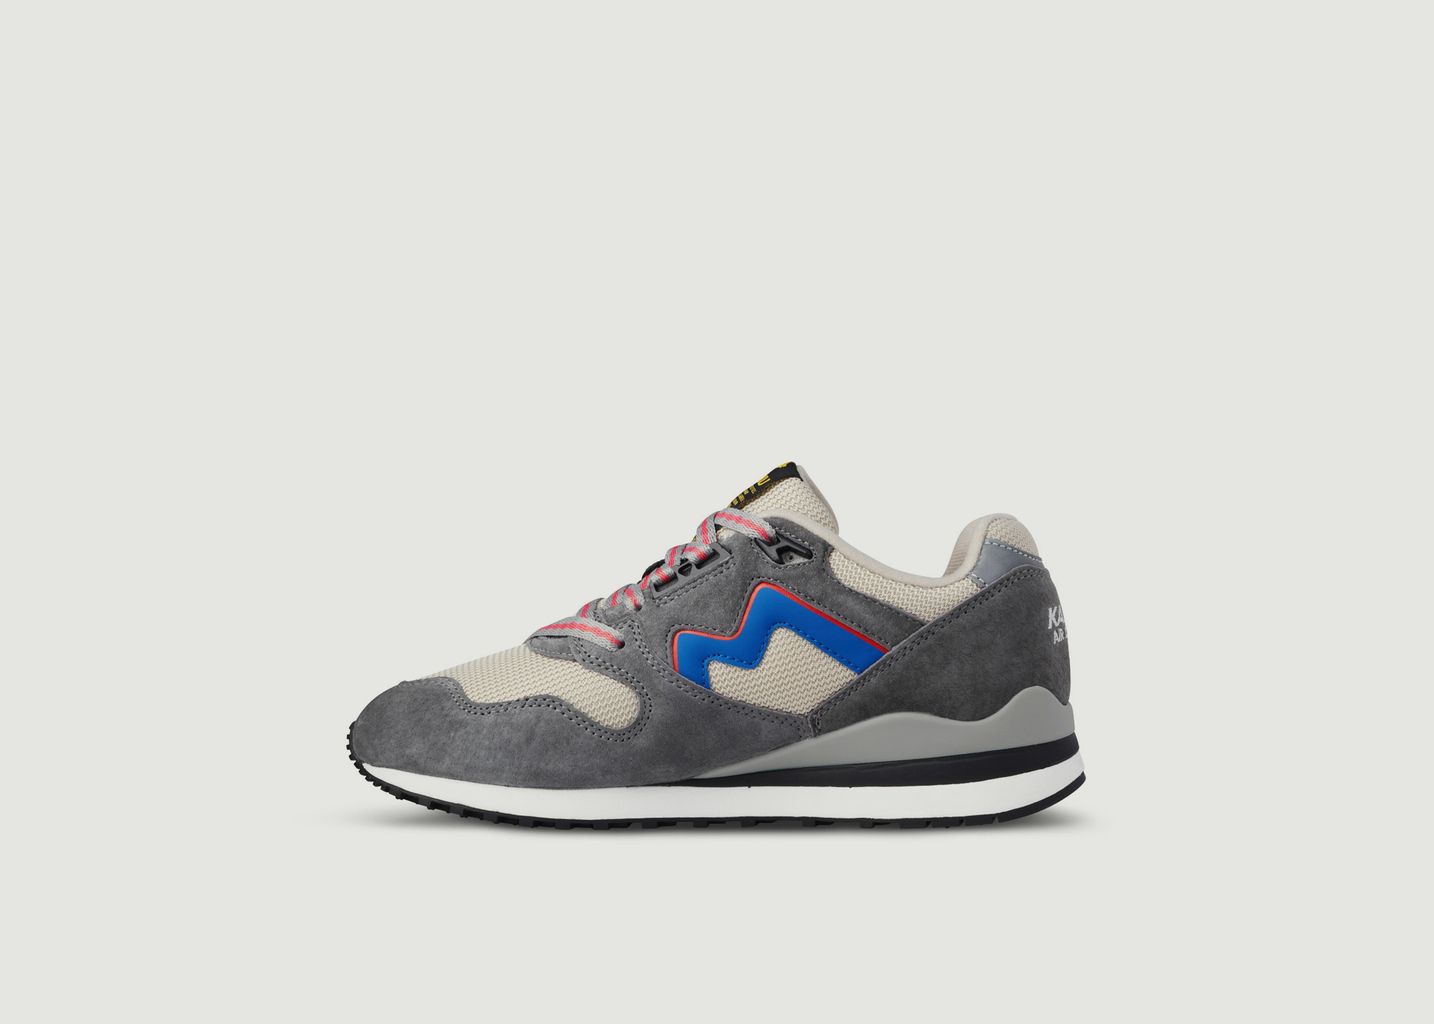 Synchron Classic suede leather and mesh running sneakers - Karhu